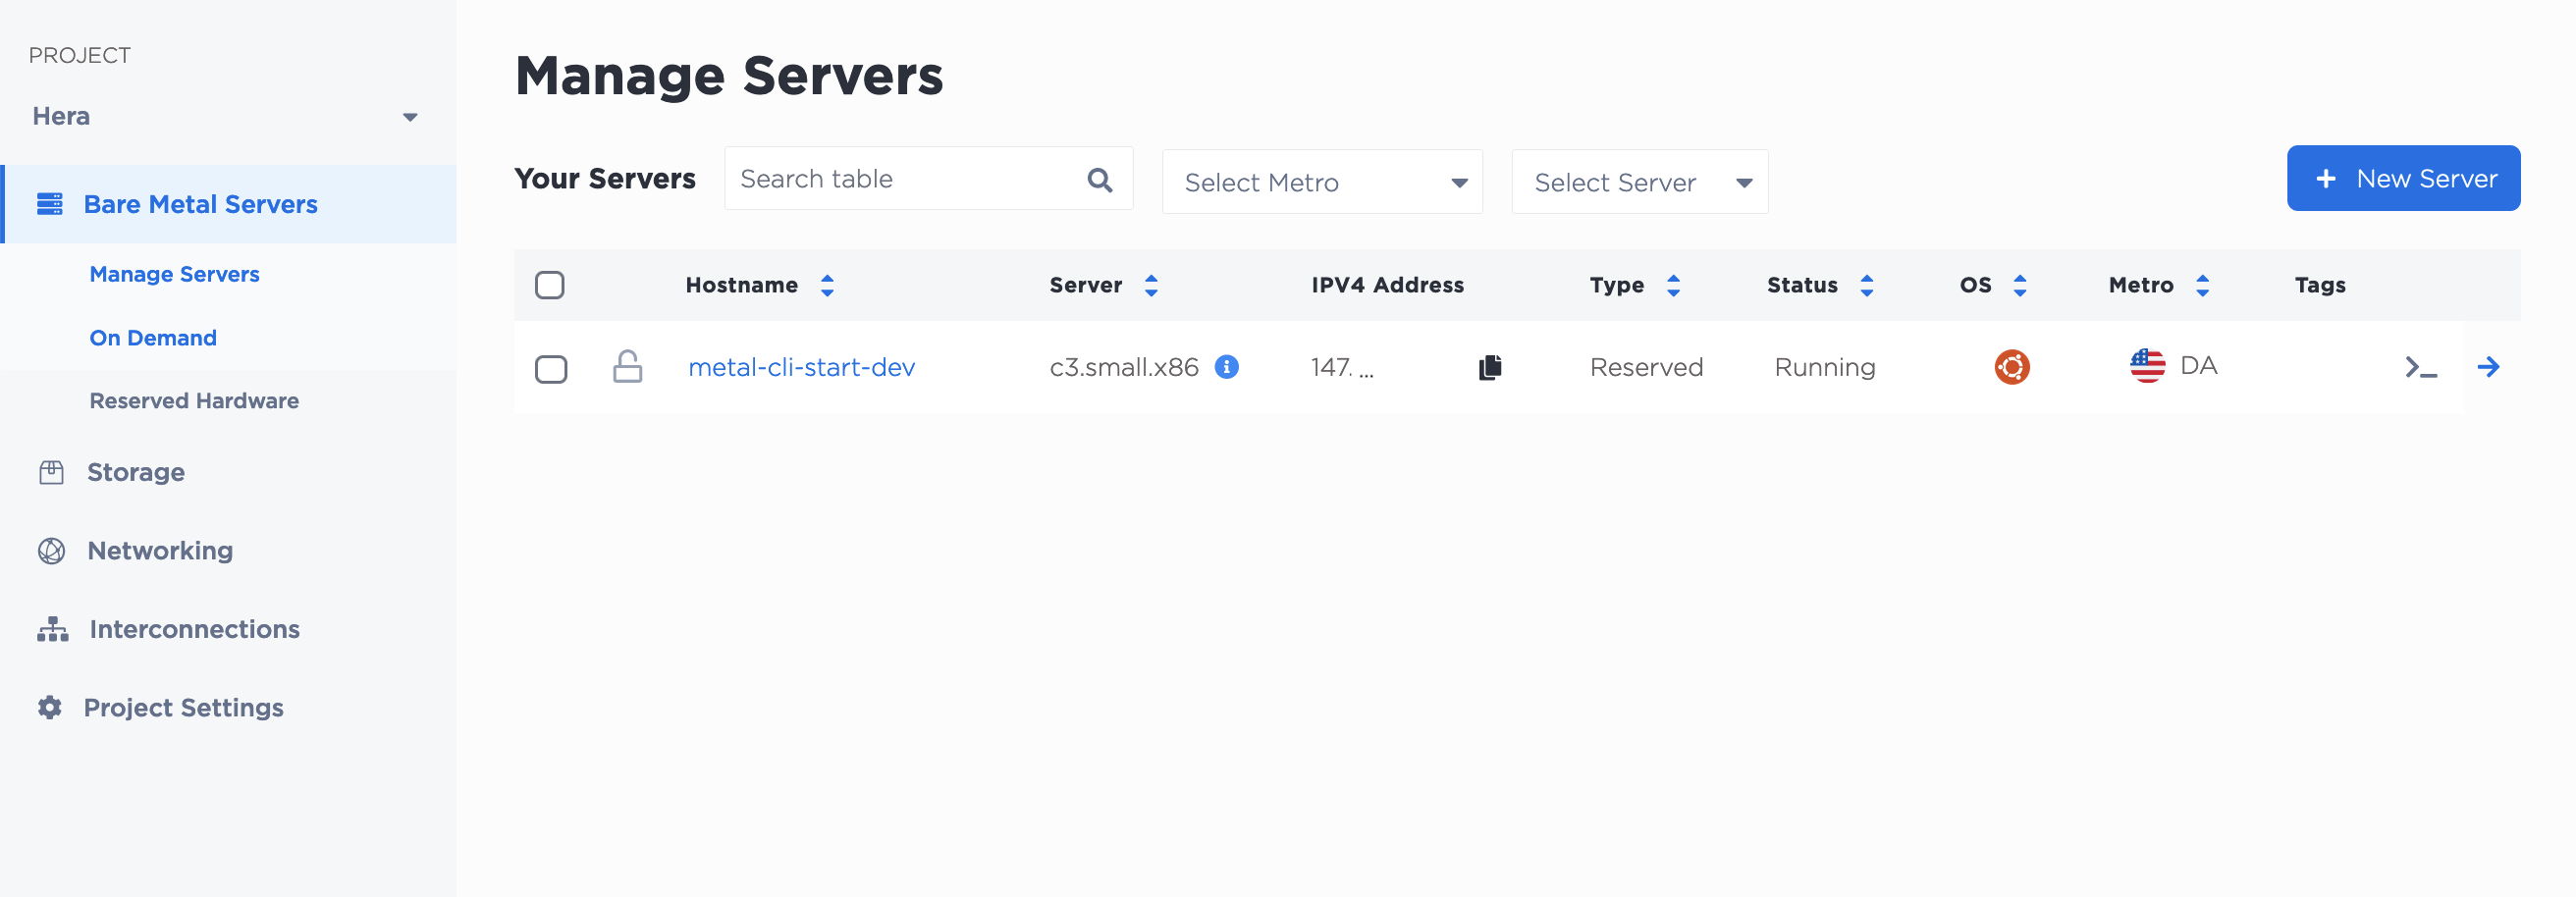 The Top-Level Manage Servers Page when You Enter a Project